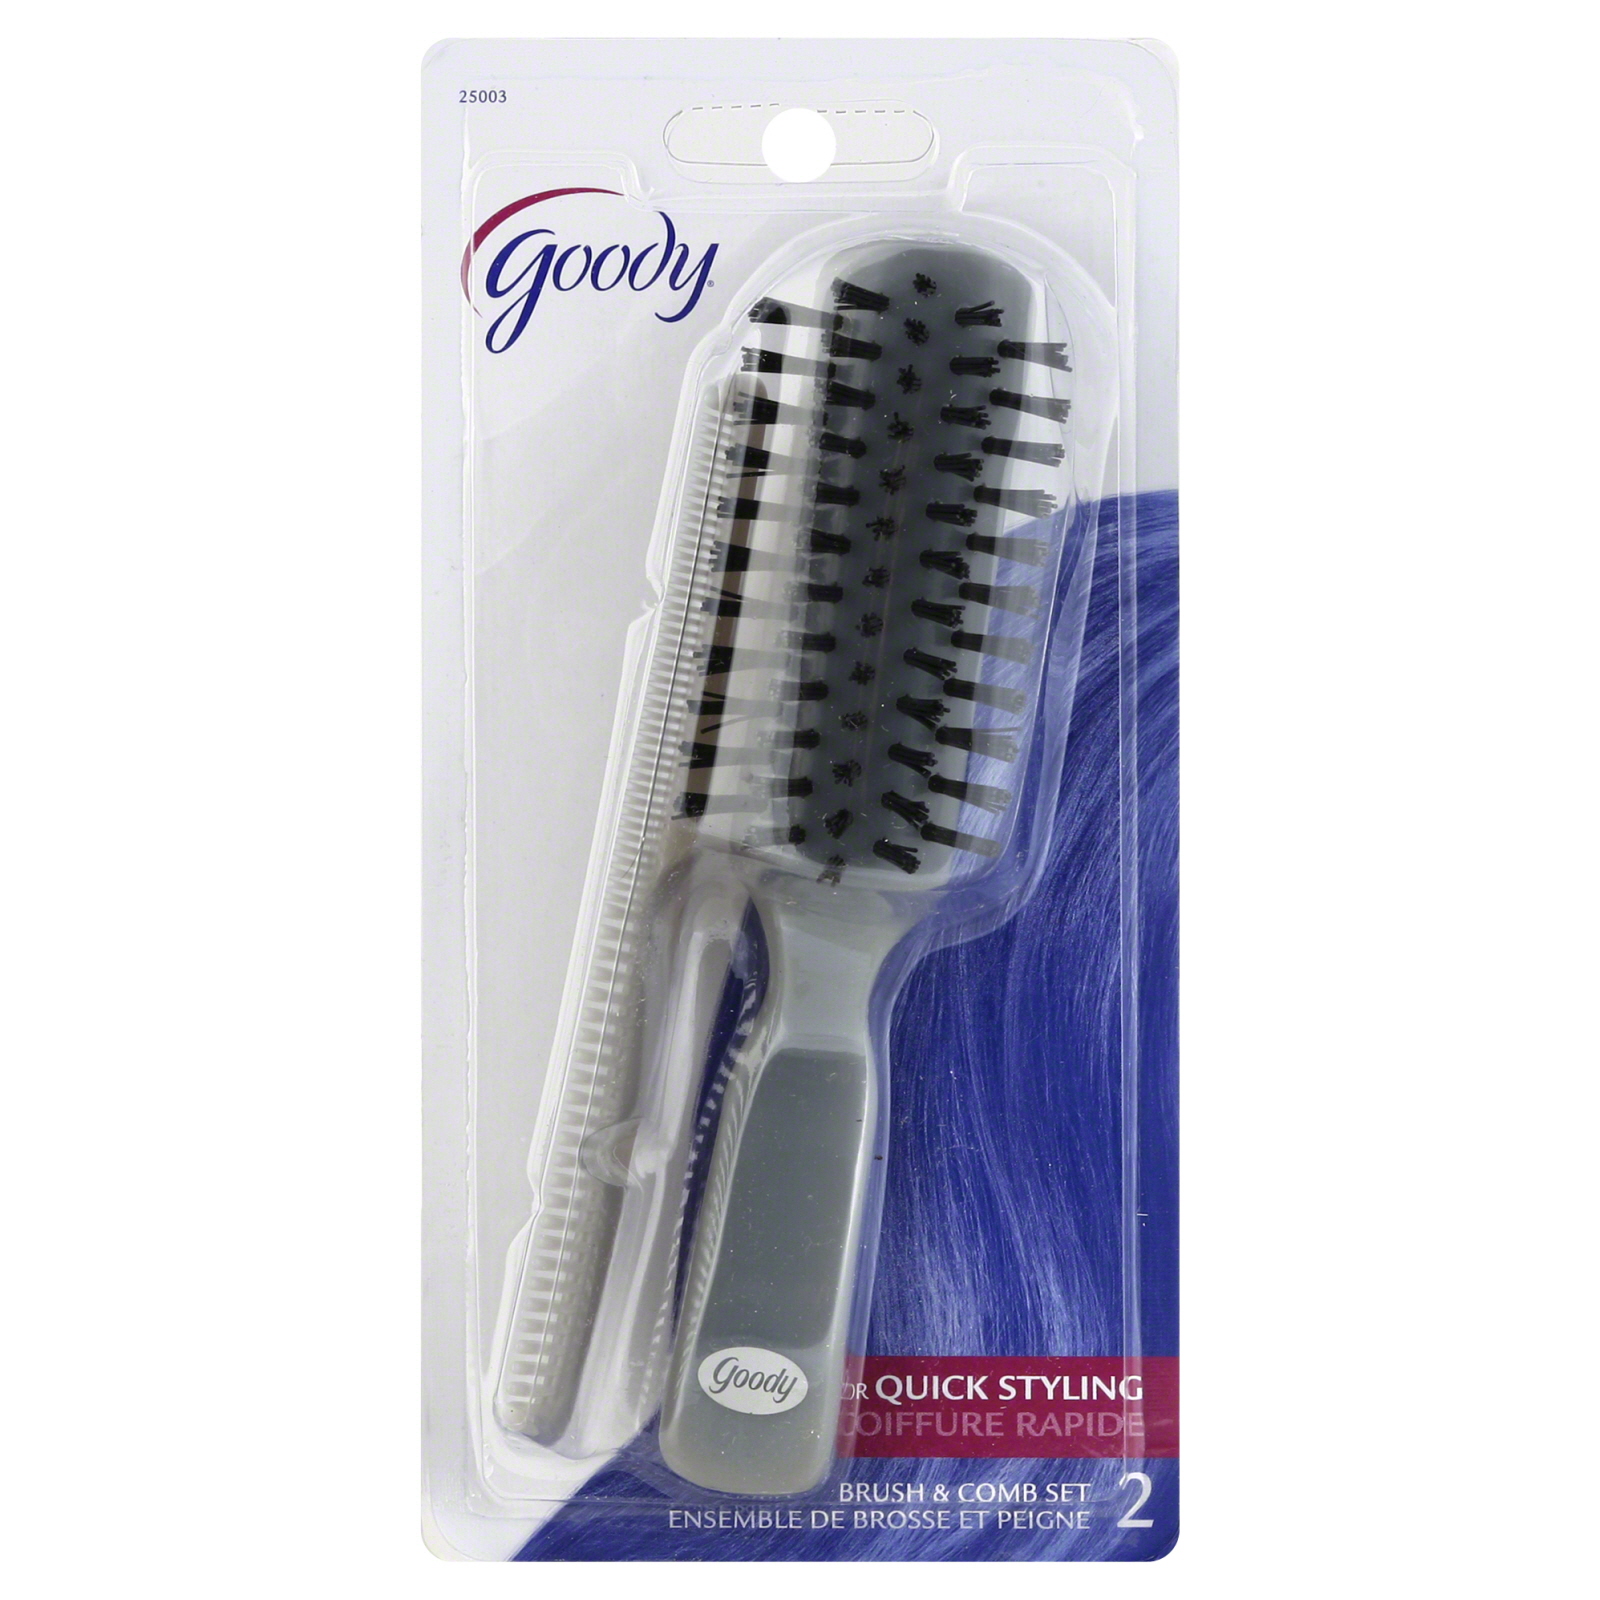 UPC 041457250037 product image for Brush & Comb Set, for Quick Styling, 1 set | upcitemdb.com